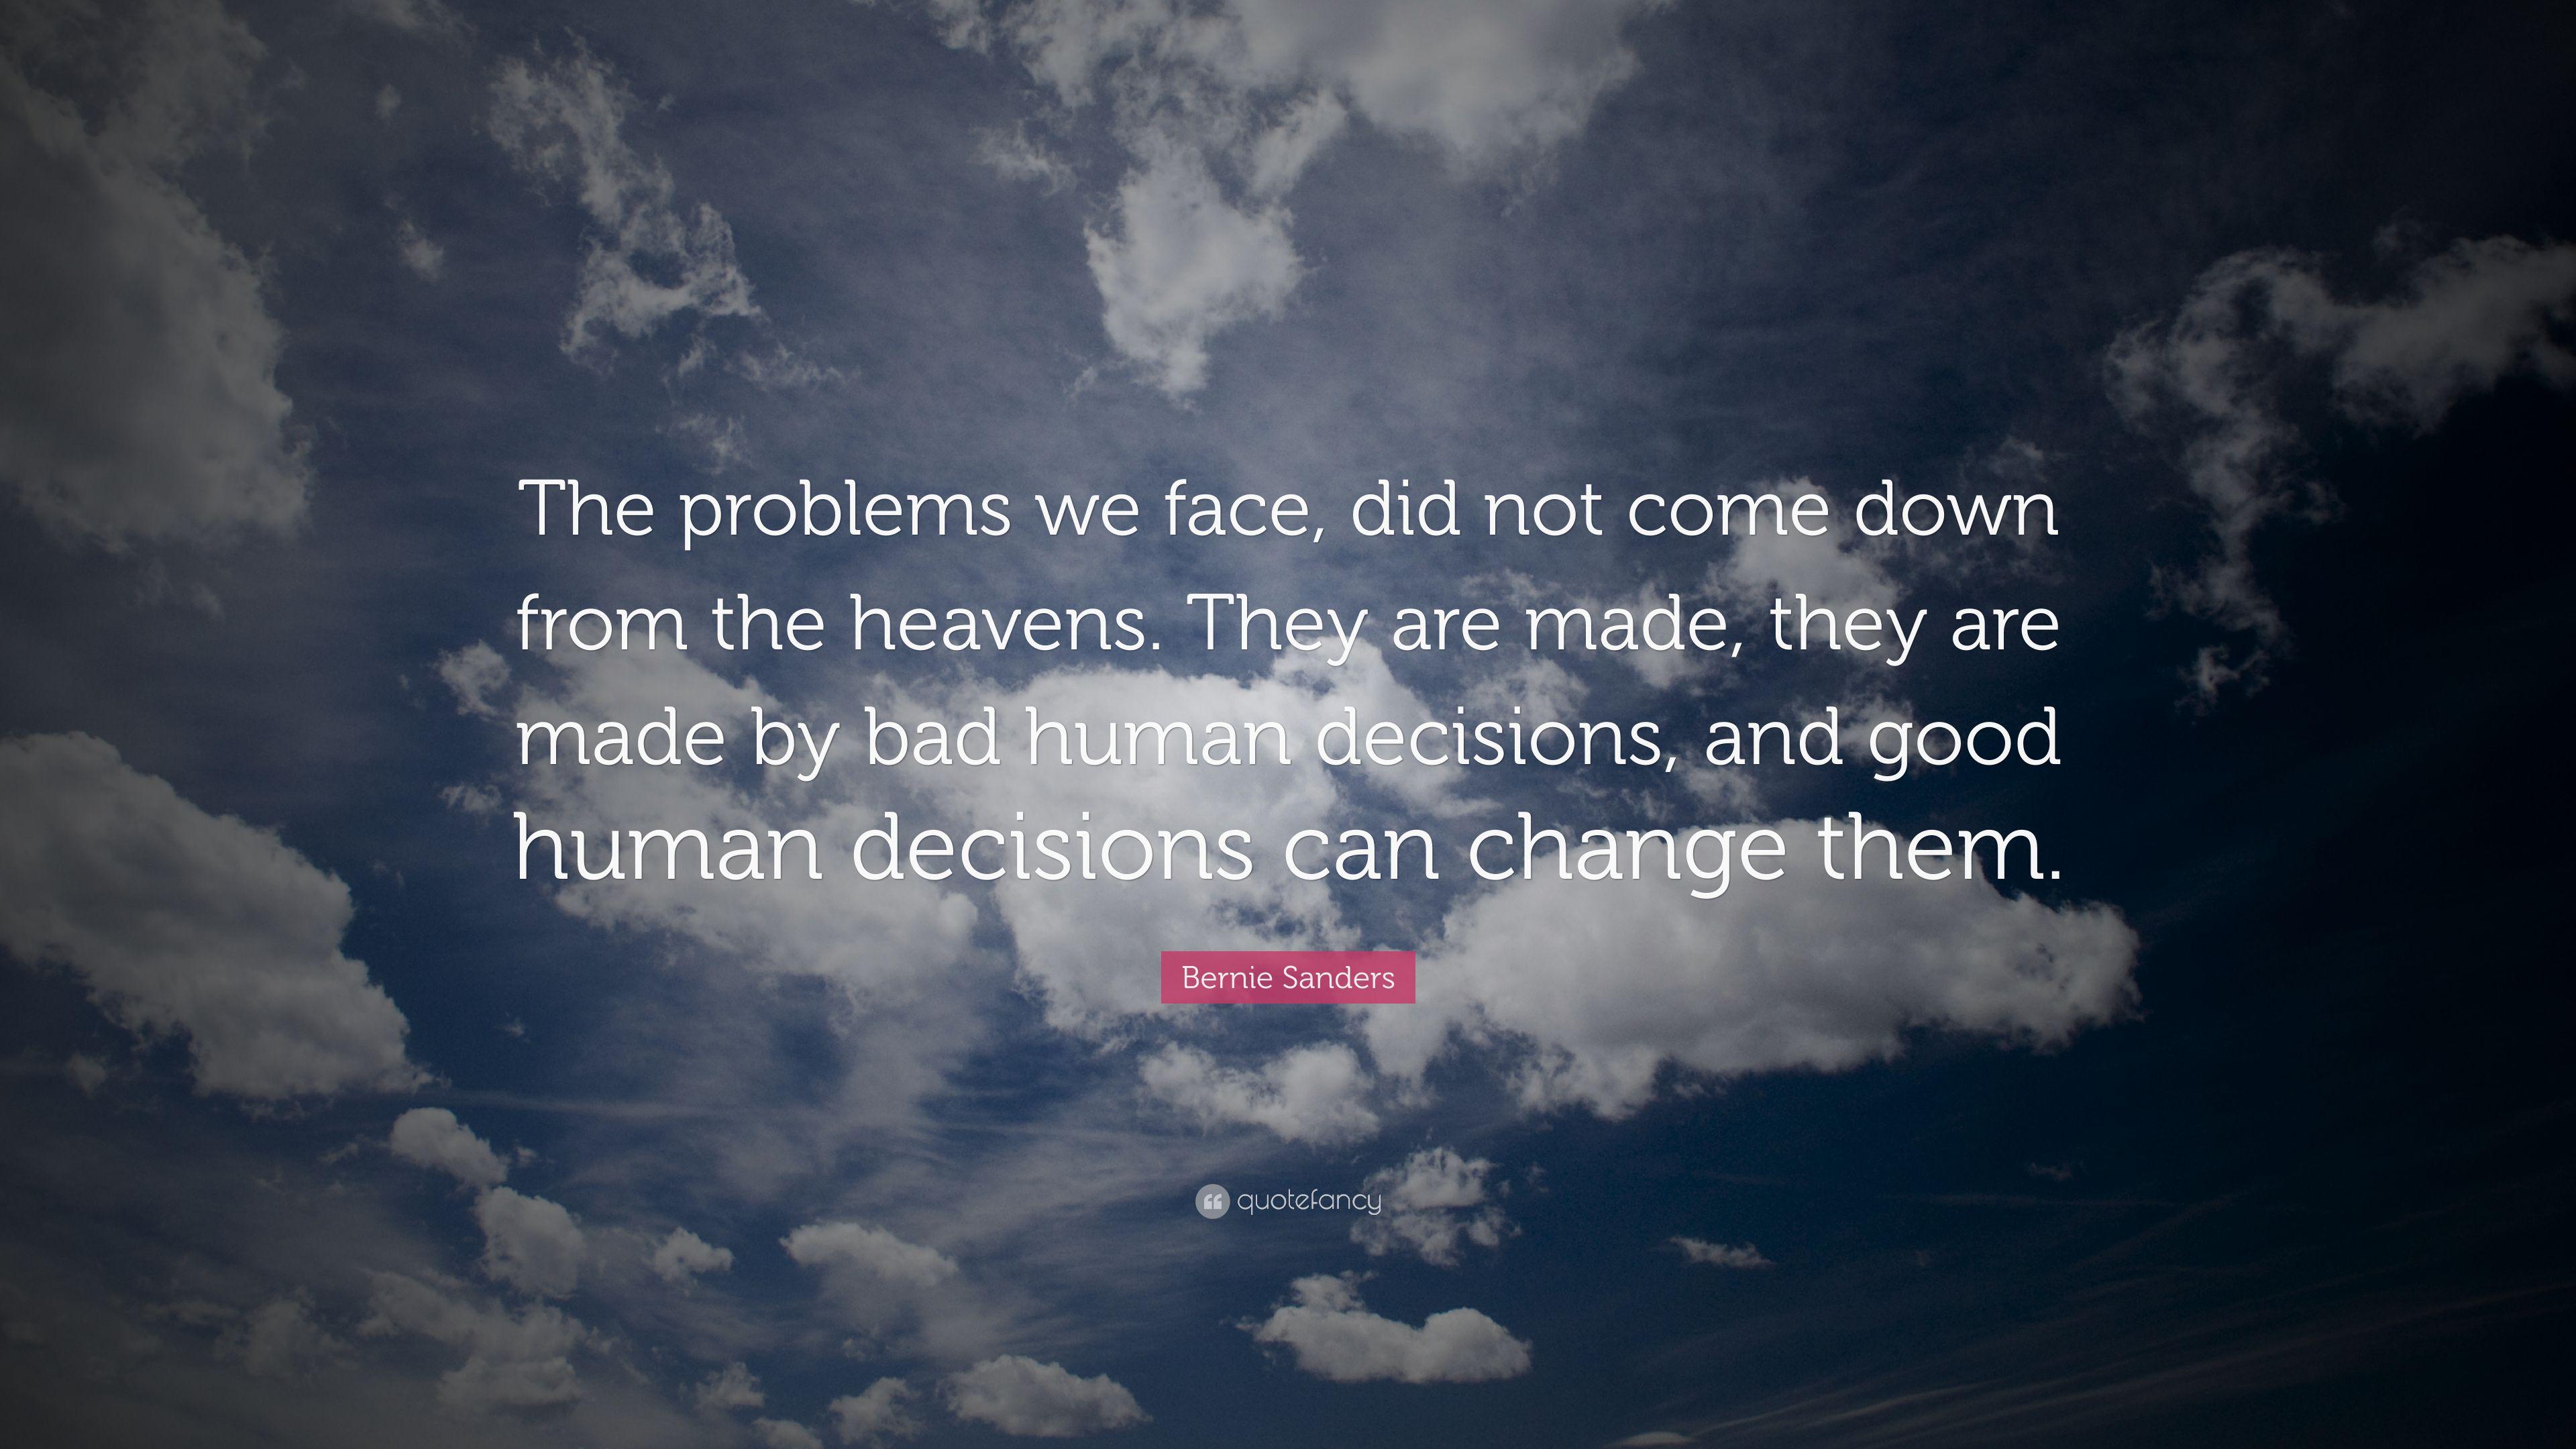 Bernie Sanders Quote: “The problems we face, did not come down